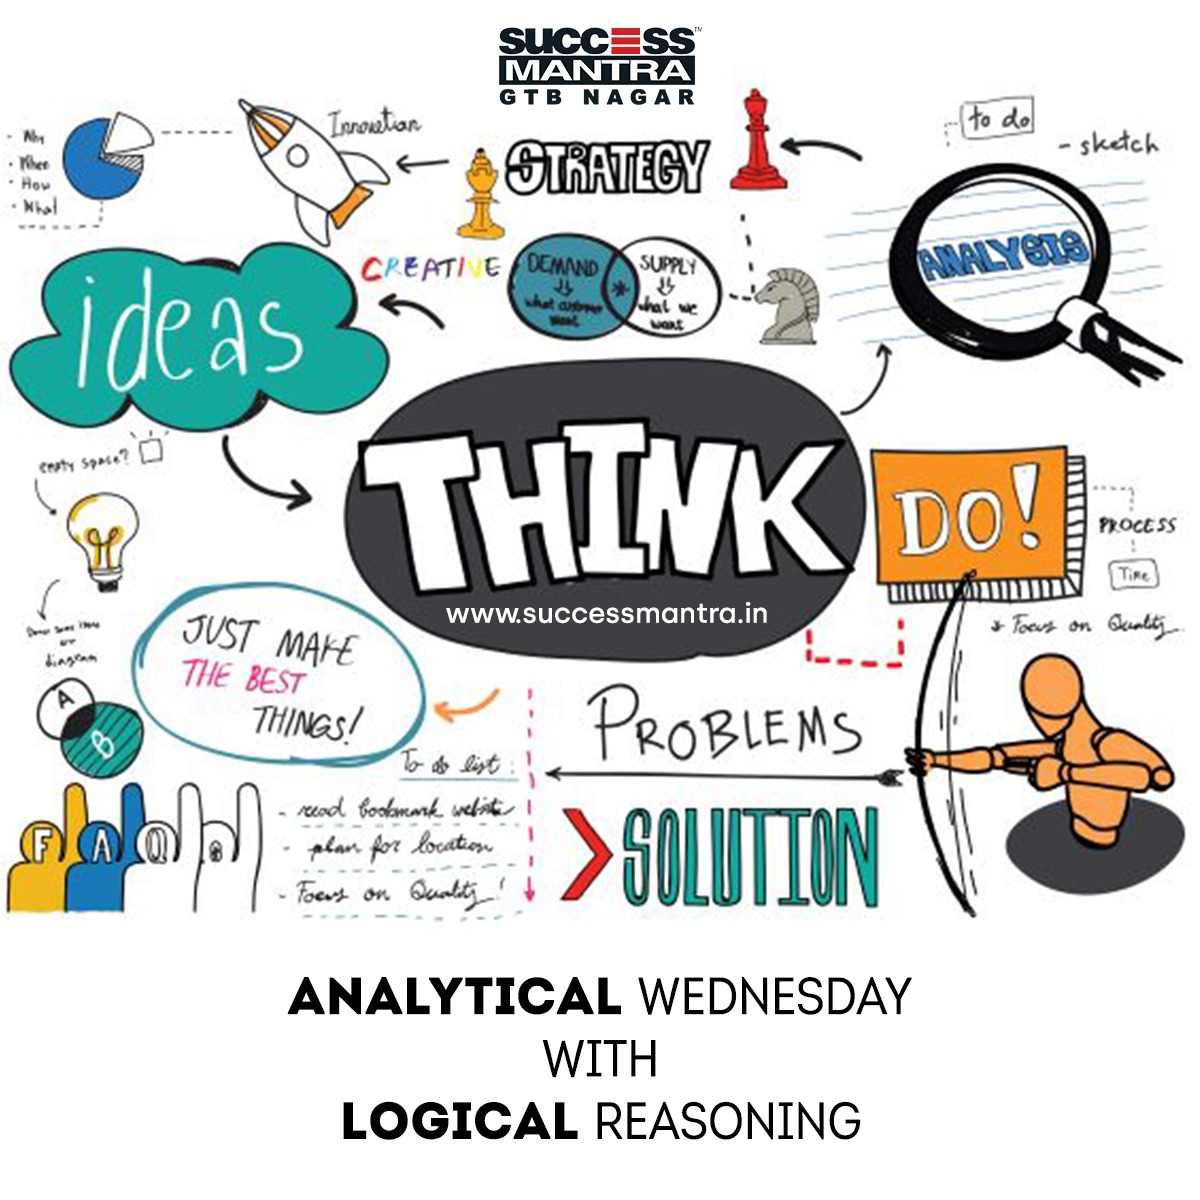 Questions on Logical Reasoning SMLRQ030